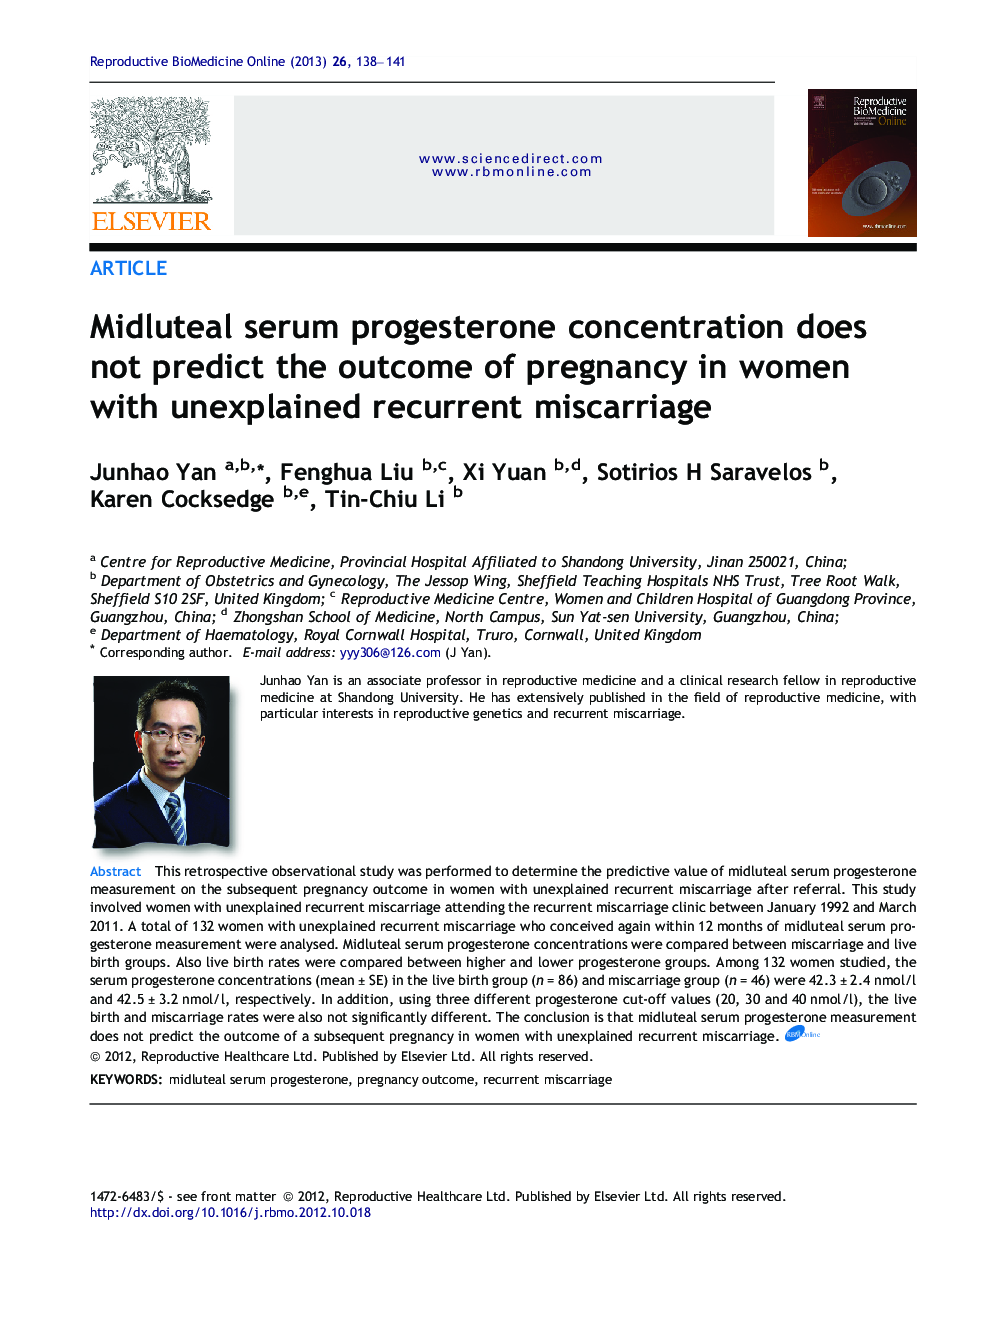 Midluteal serum progesterone concentration does not predict the outcome of pregnancy in women with unexplained recurrent miscarriage 